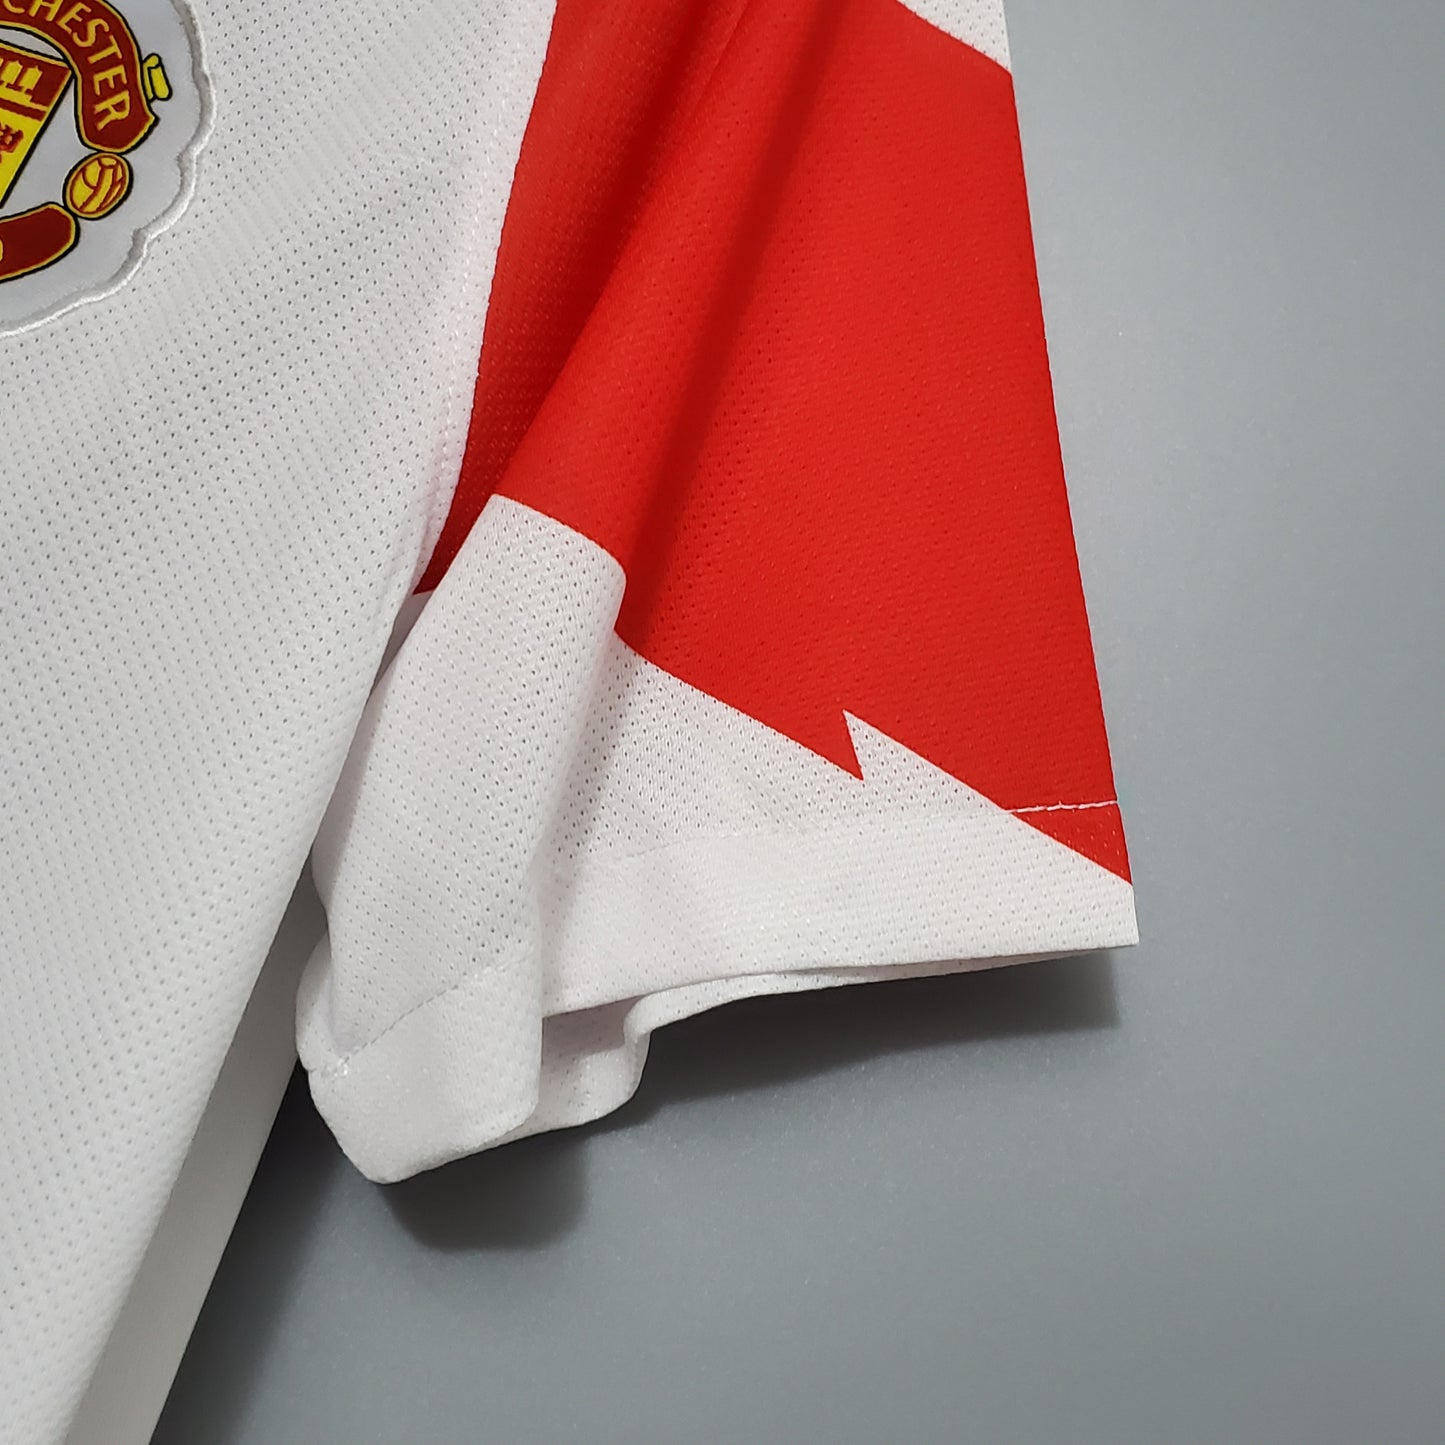 Manchester United 2010/11 Away Jersey - Champions League Final